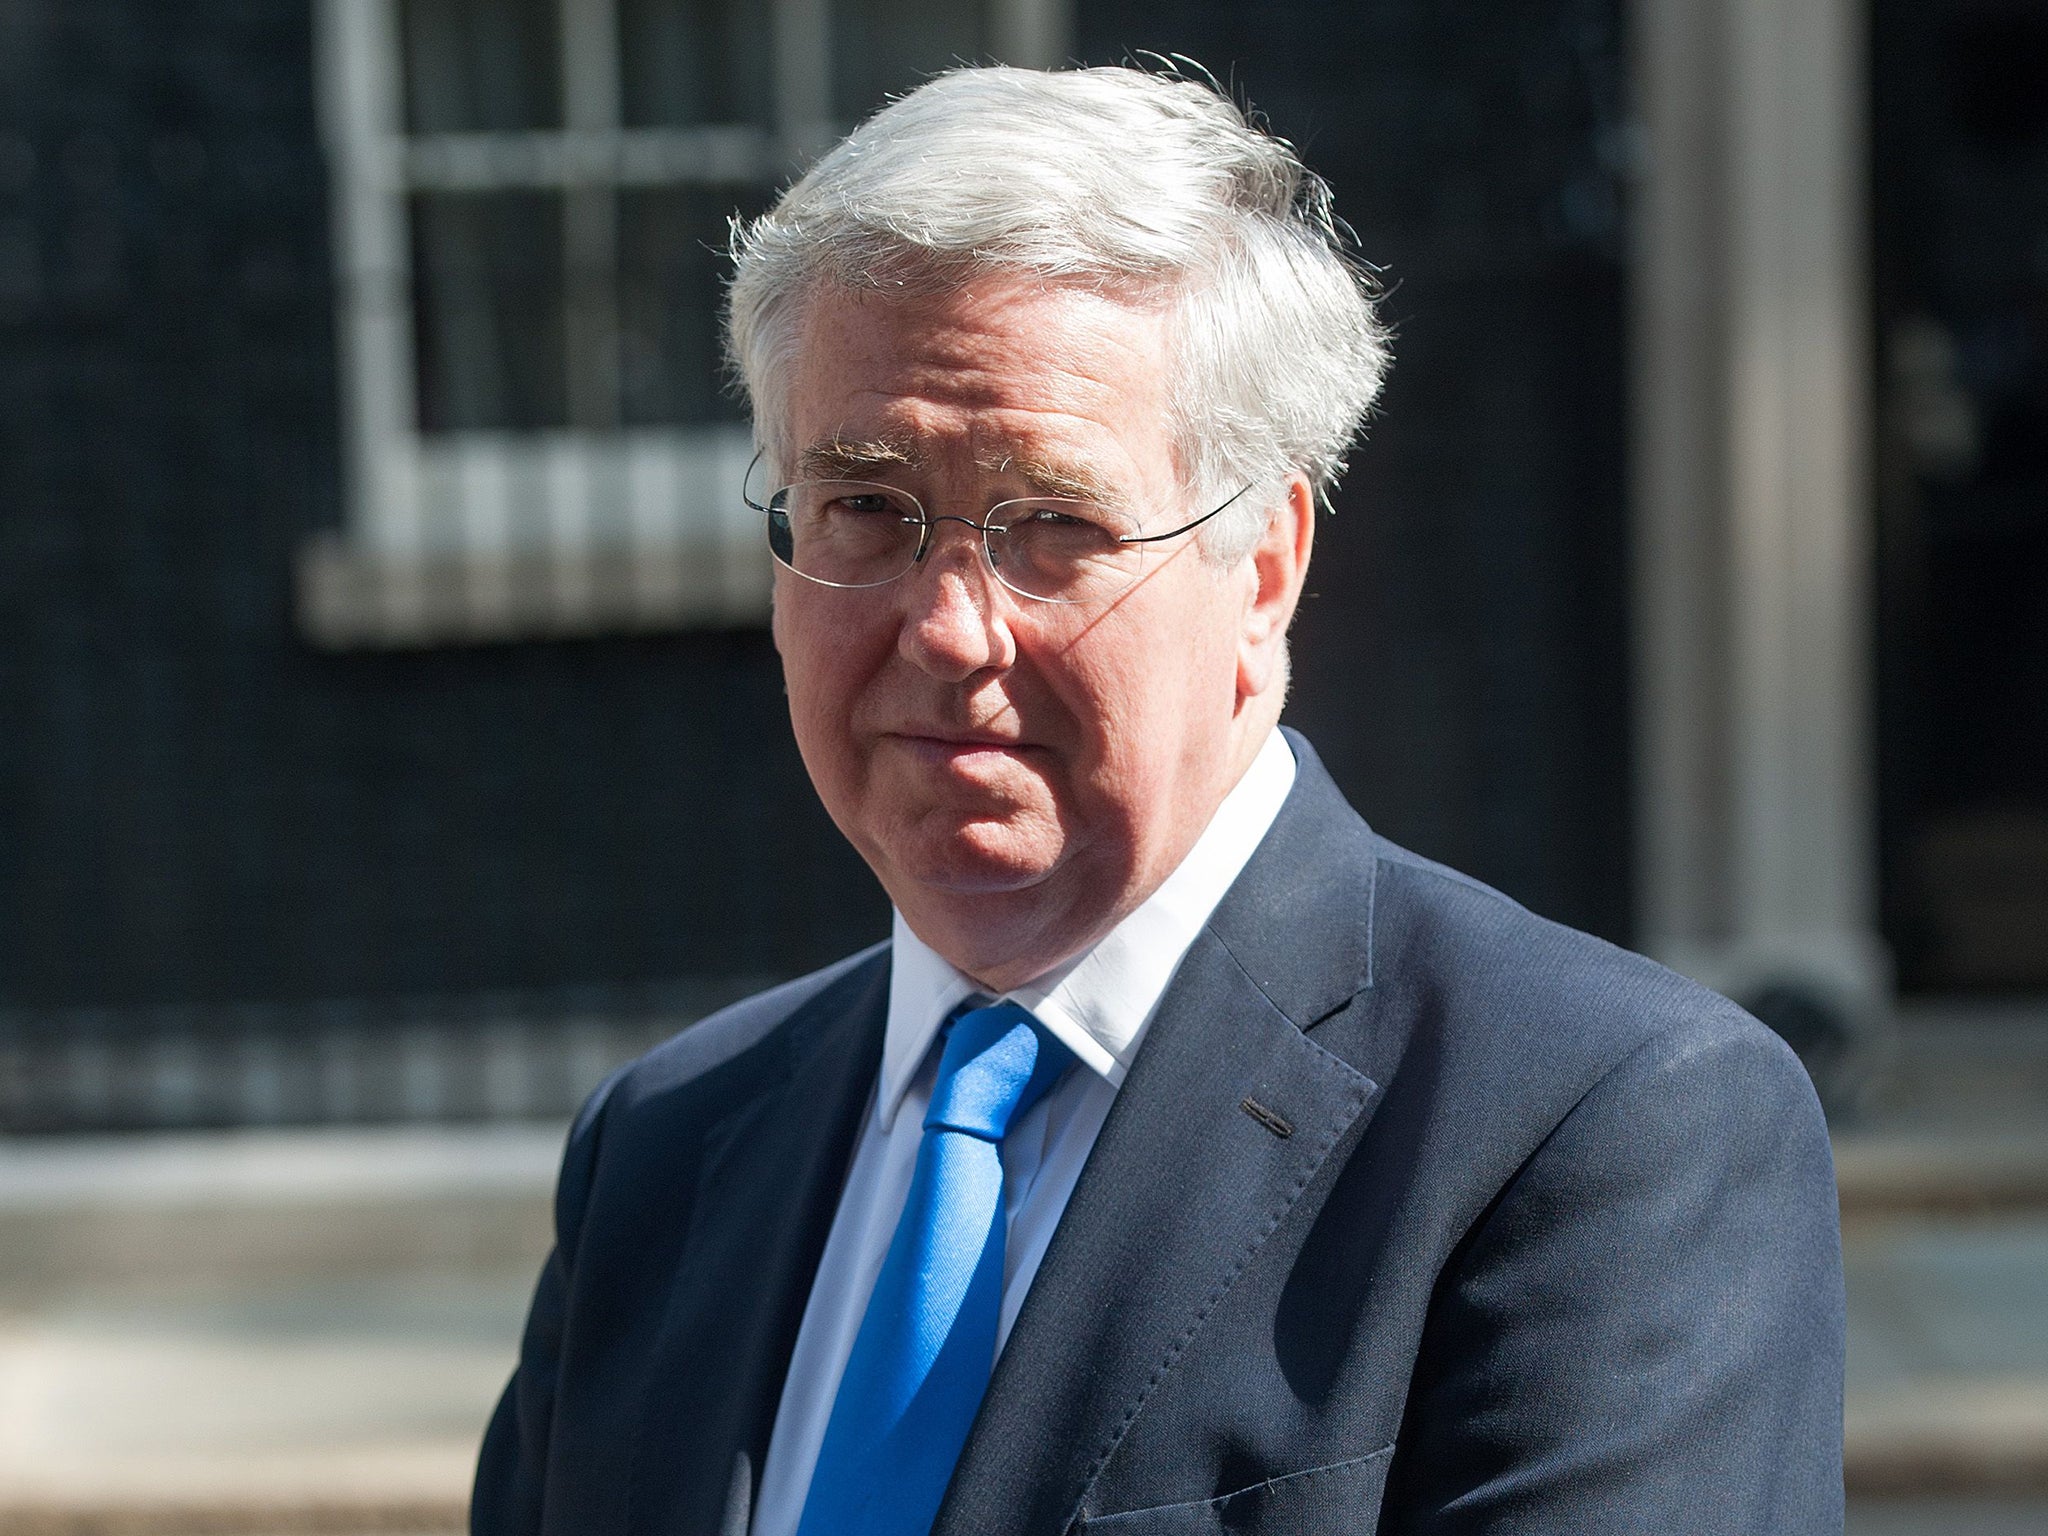 Michael Fallon backs the Government's decision to ramp-up security measures in the face of 'very real' terrorist threats 